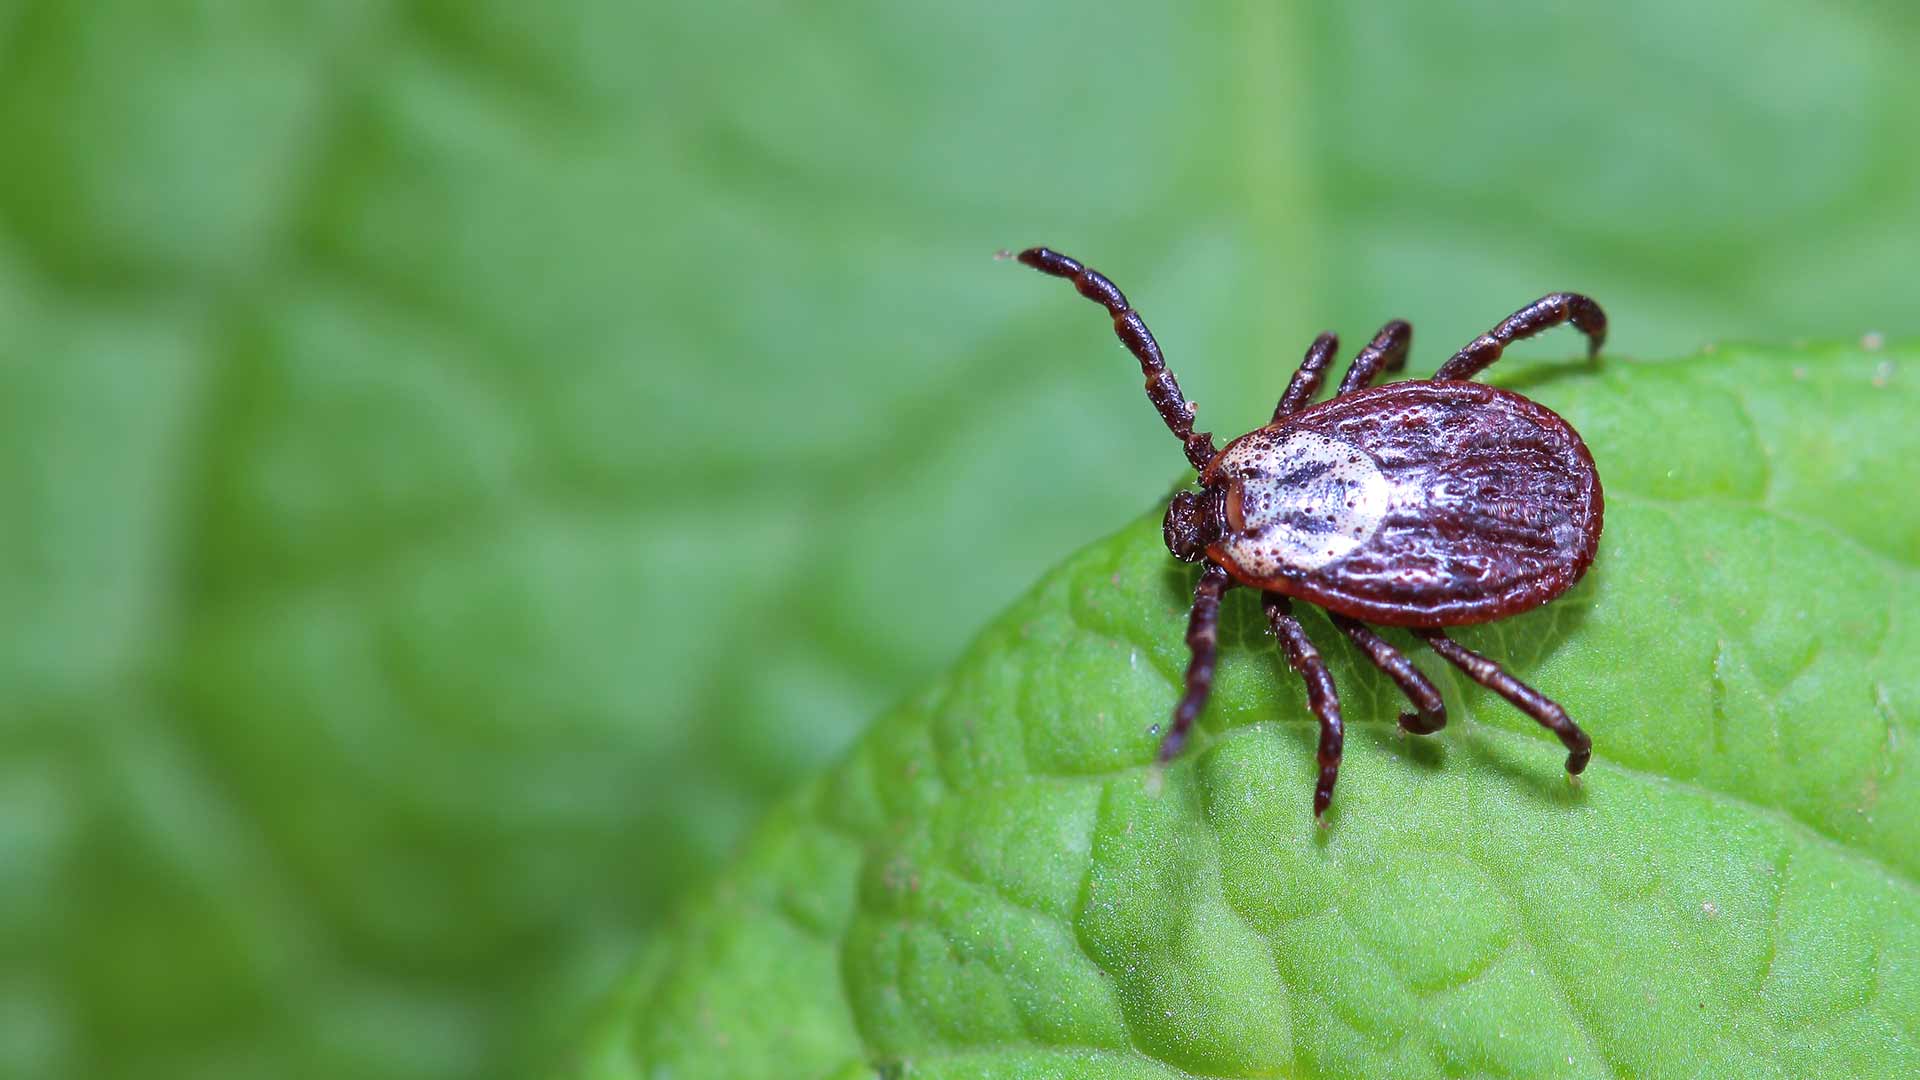 Tick spotted on a leaf in Mansfield, Ohio.